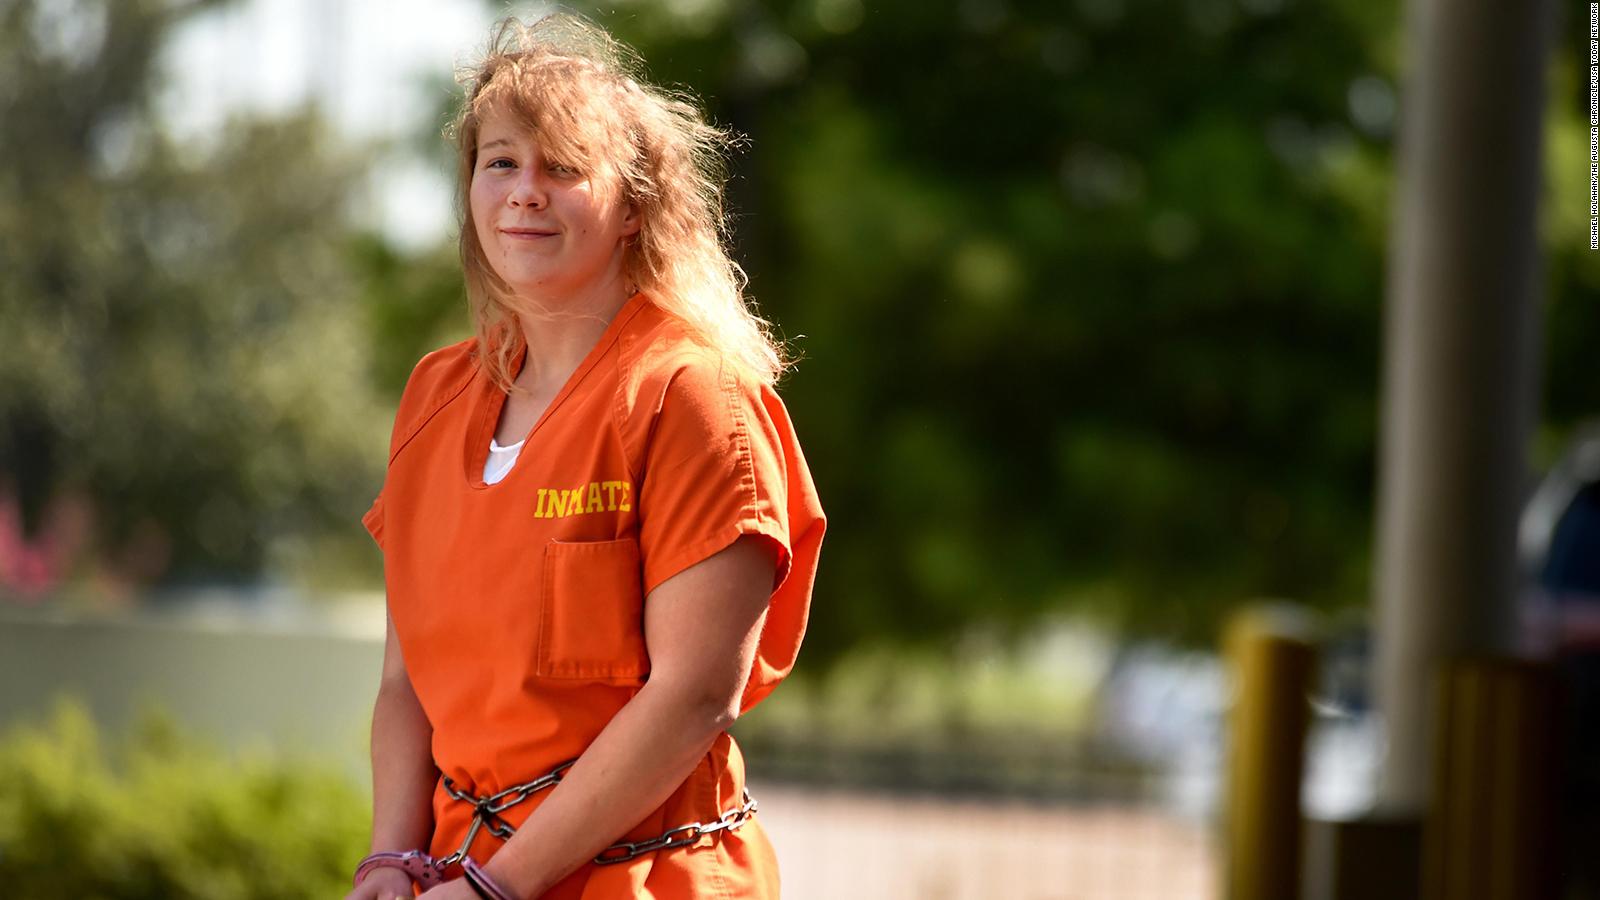 Reality Winner Nsa Leaker Released From Prison To Halfway House Cnnpolitics 7888